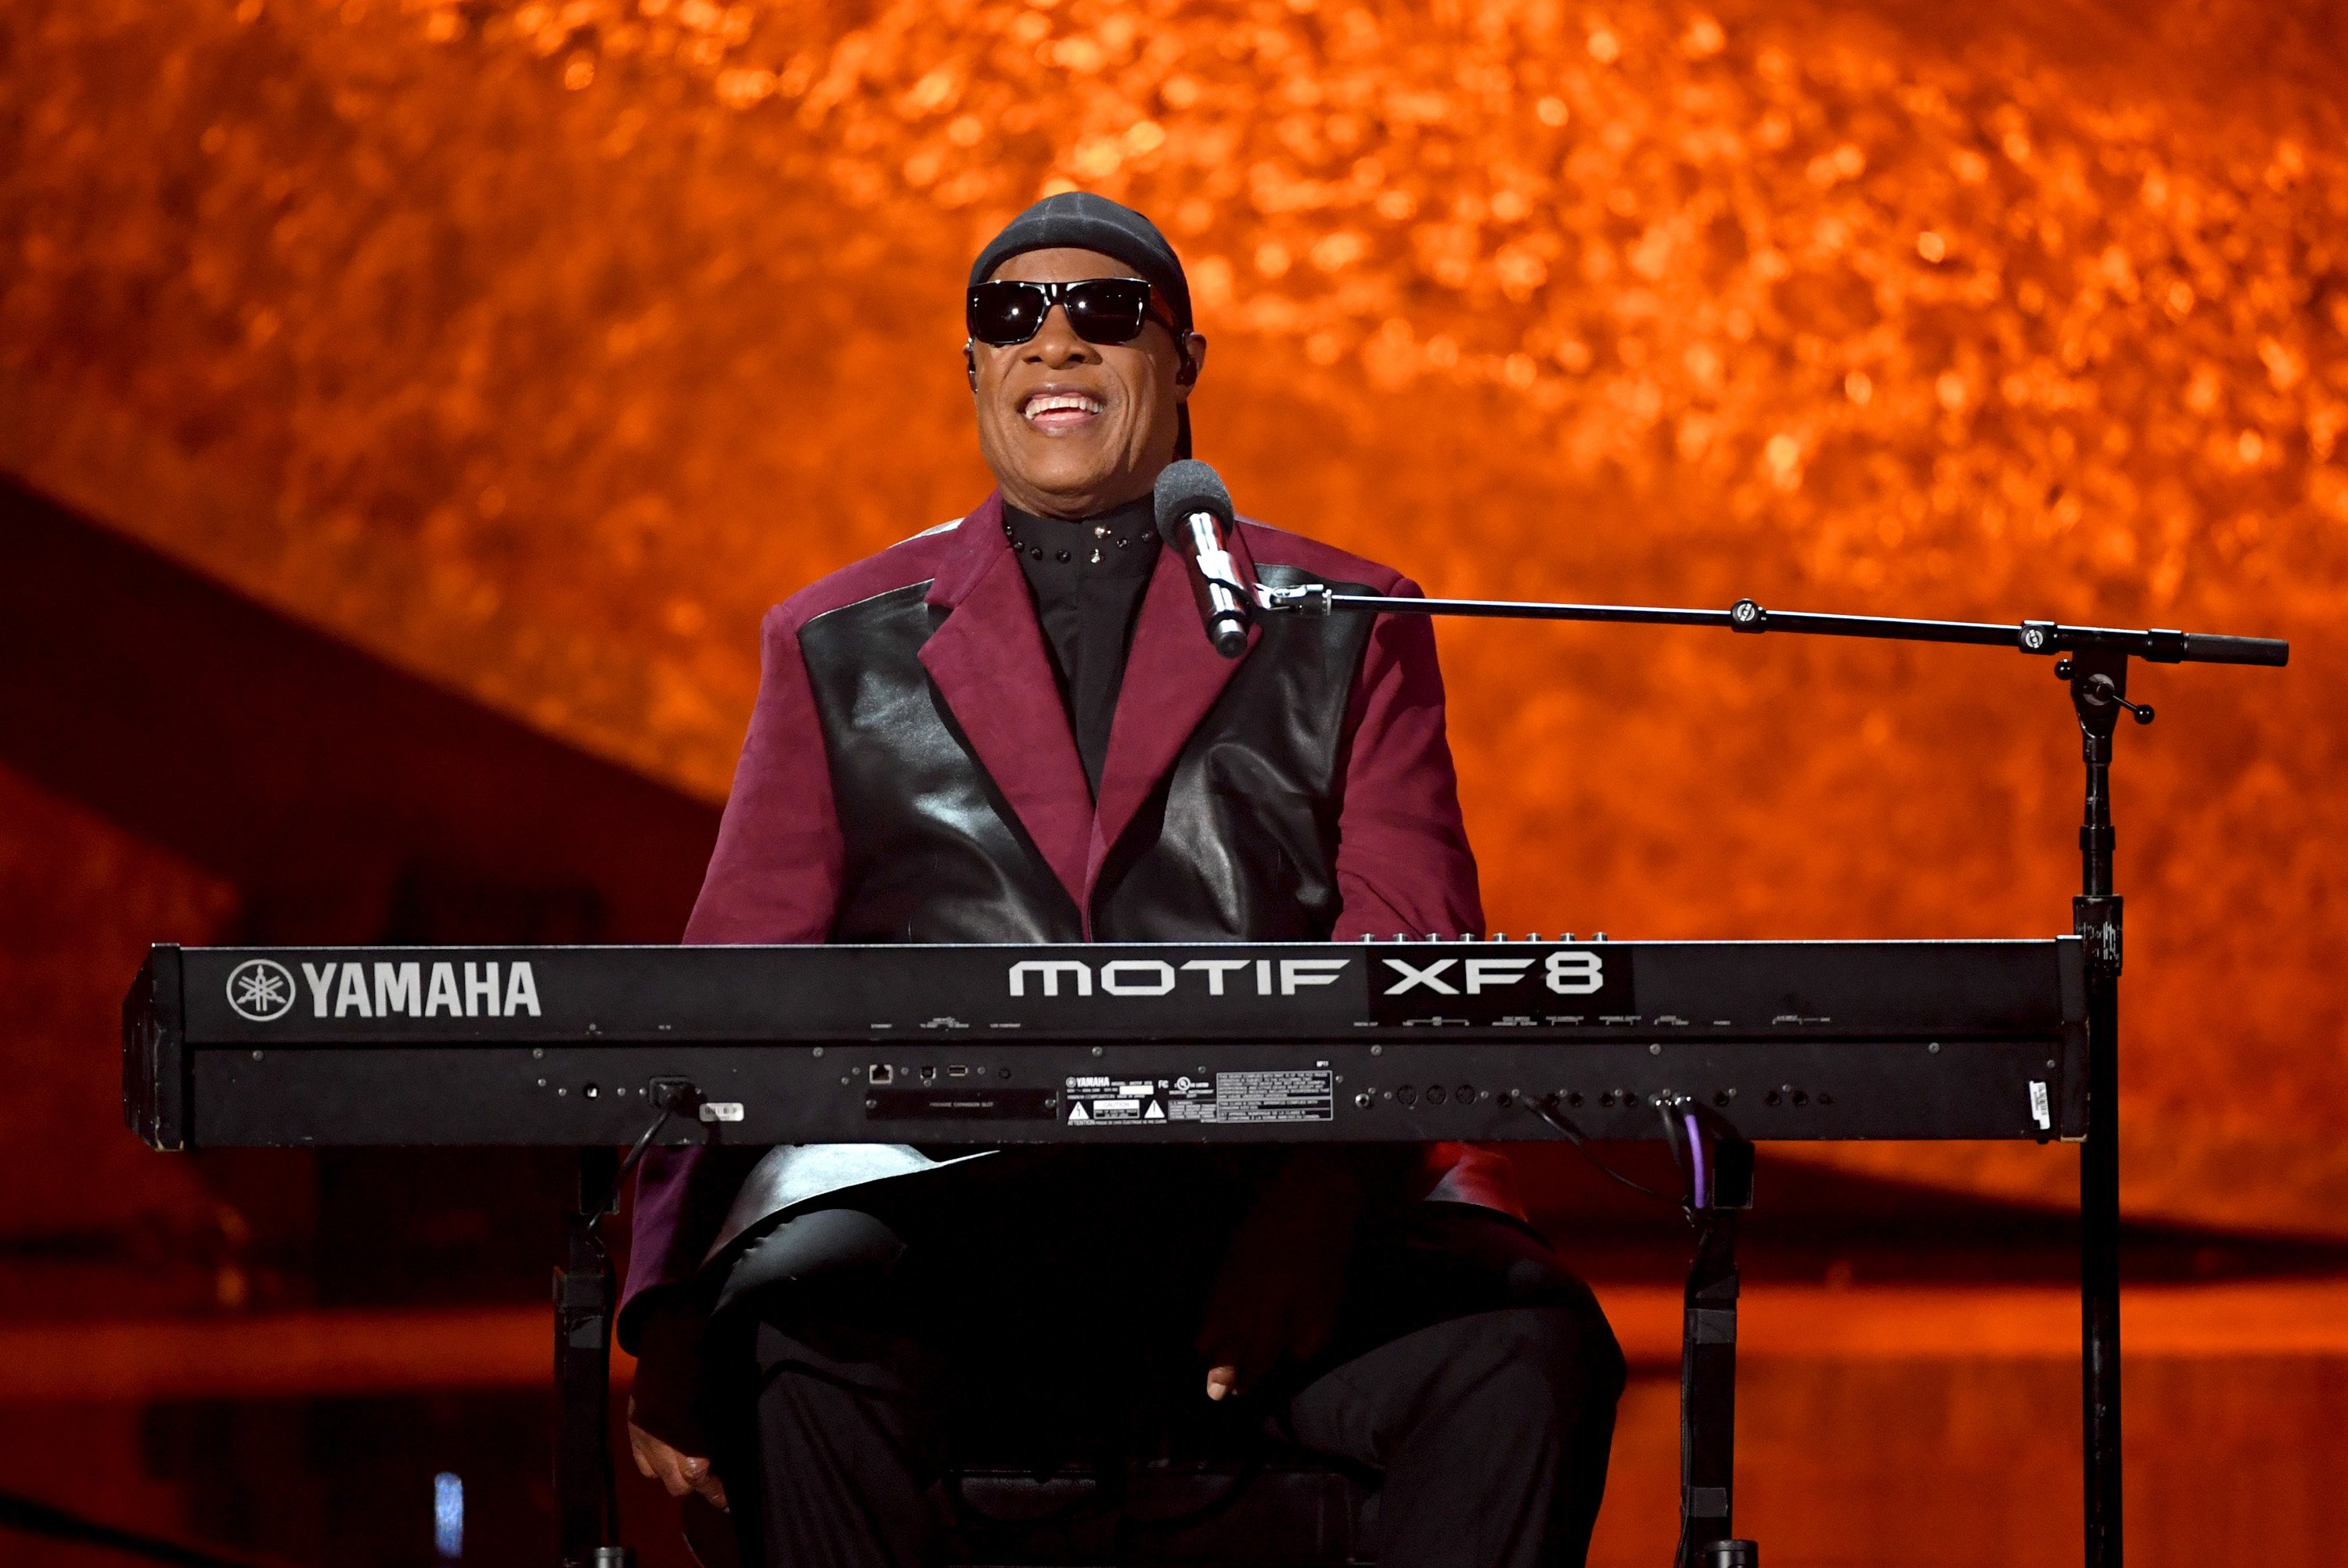 Stevie Wonder performs onstage at the Microsoft Theatre in Los Angeles, California on September 25, 2018 | Source: Getty Images